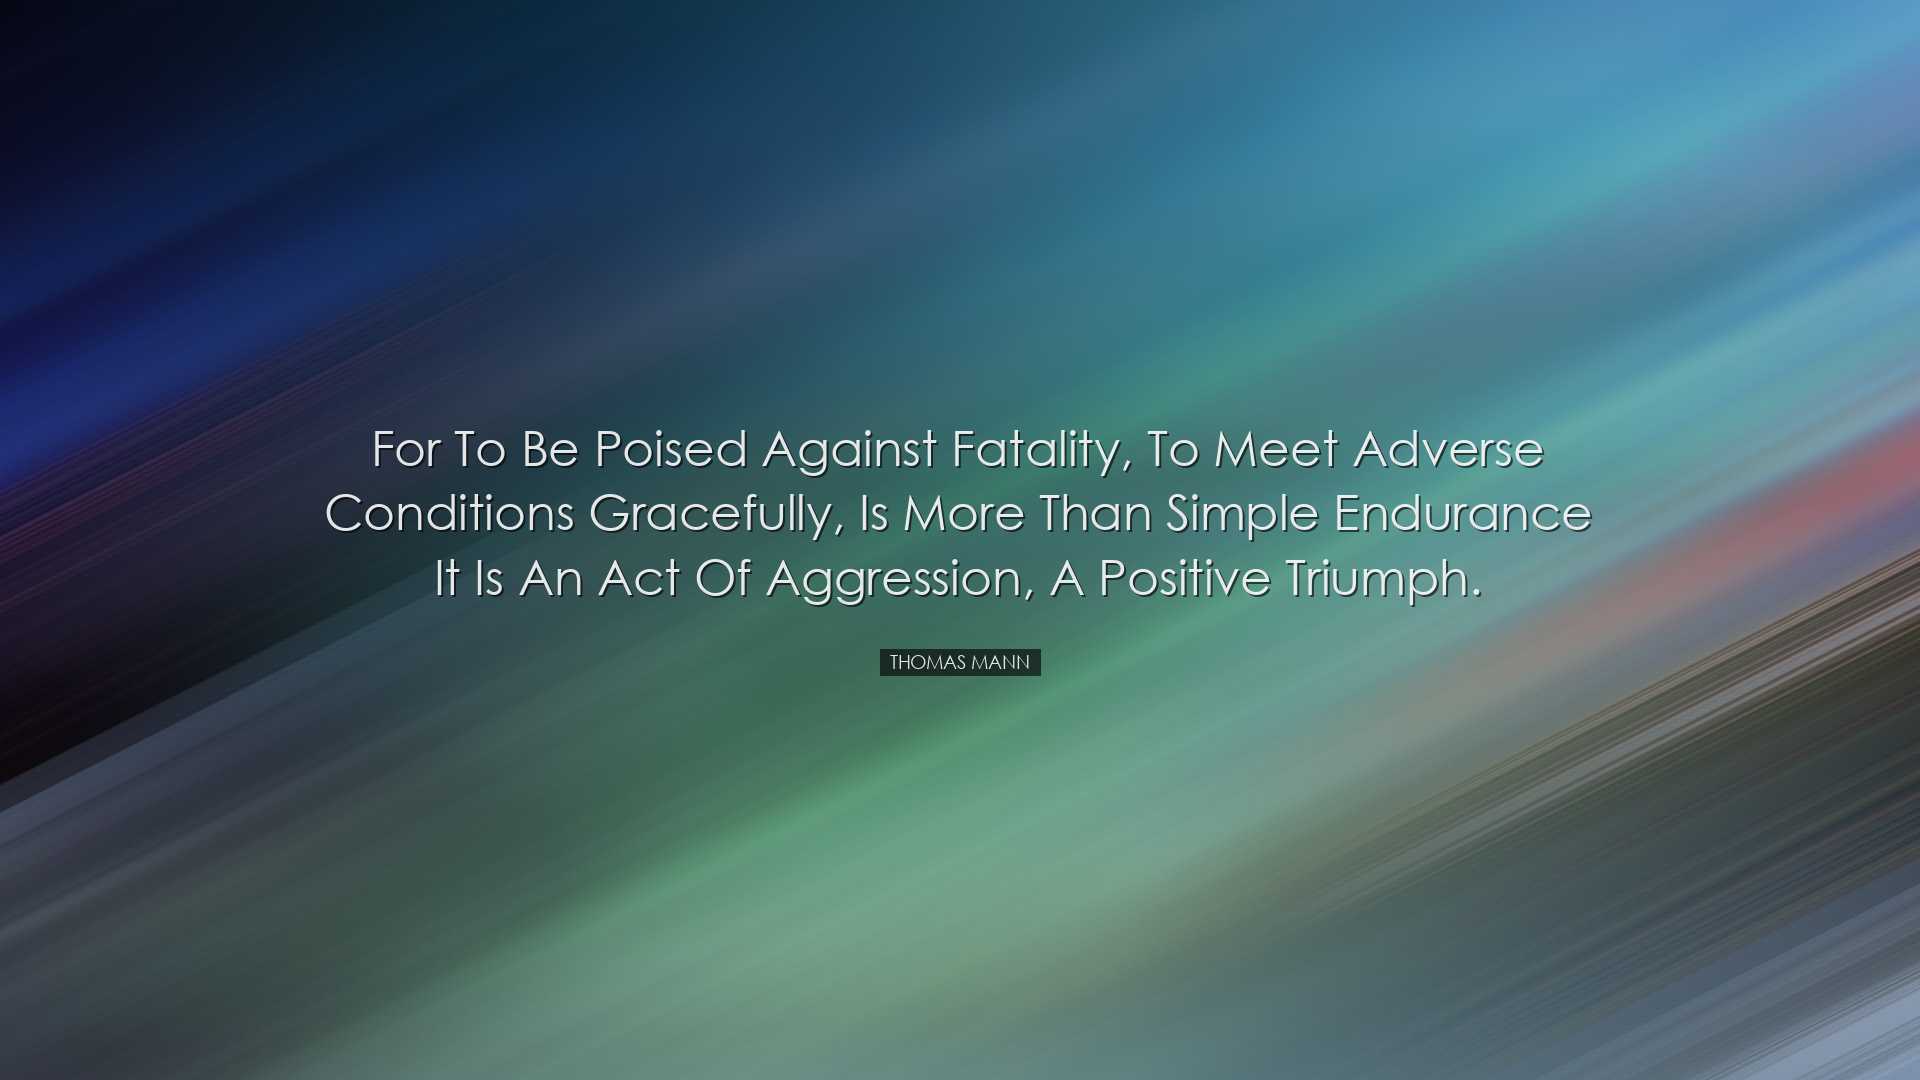 For to be poised against fatality, to meet adverse conditions grac